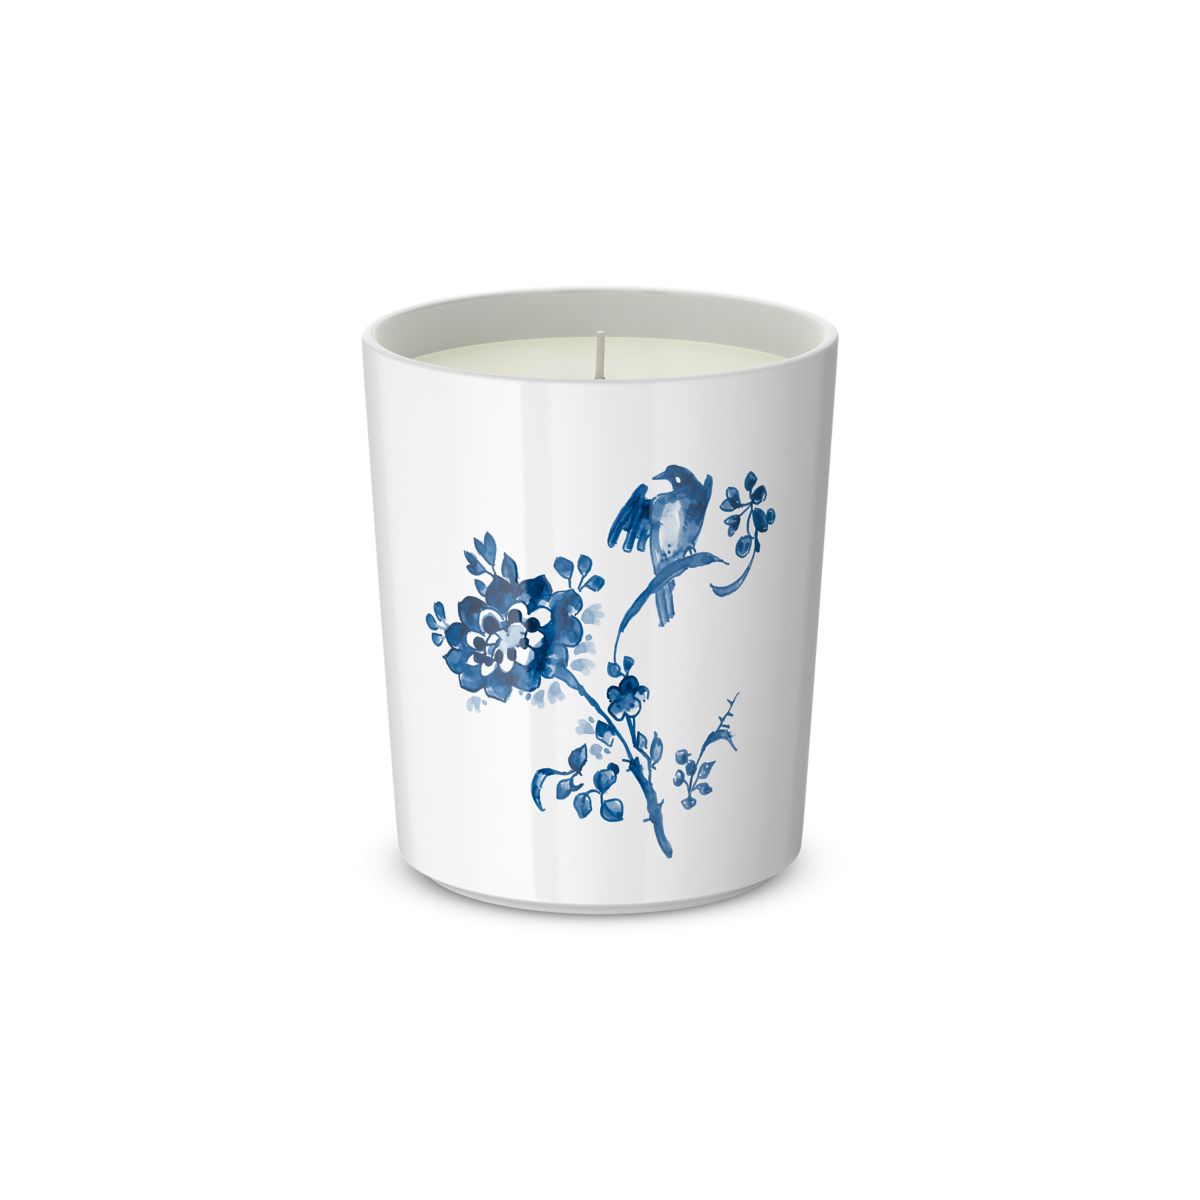 Rituals Amsterdam Collection Candle